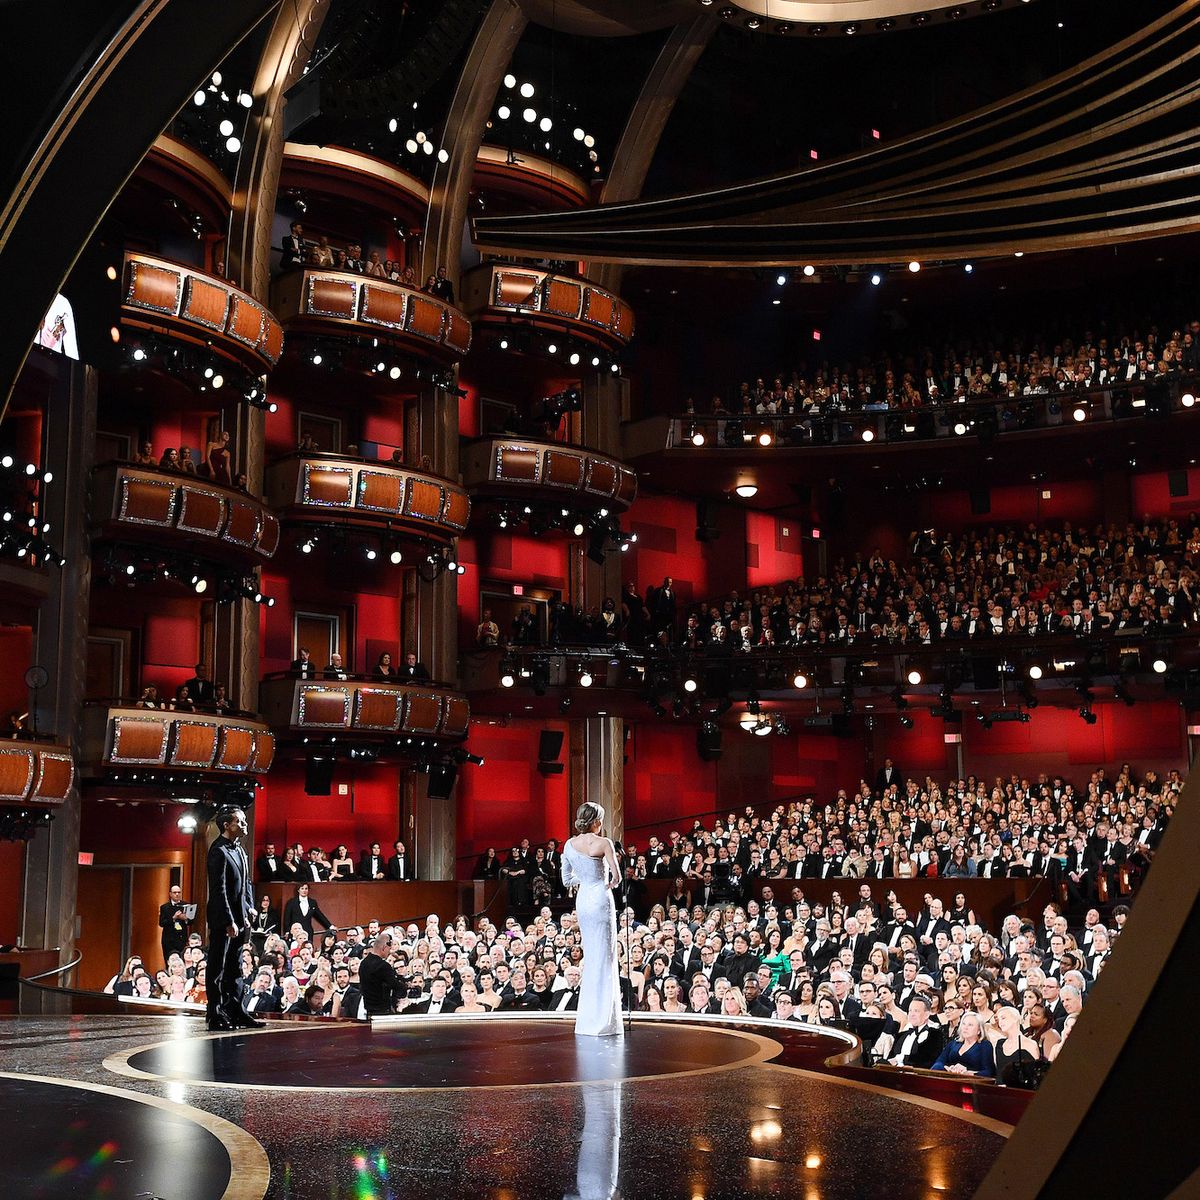 oscars ongoing representation issue